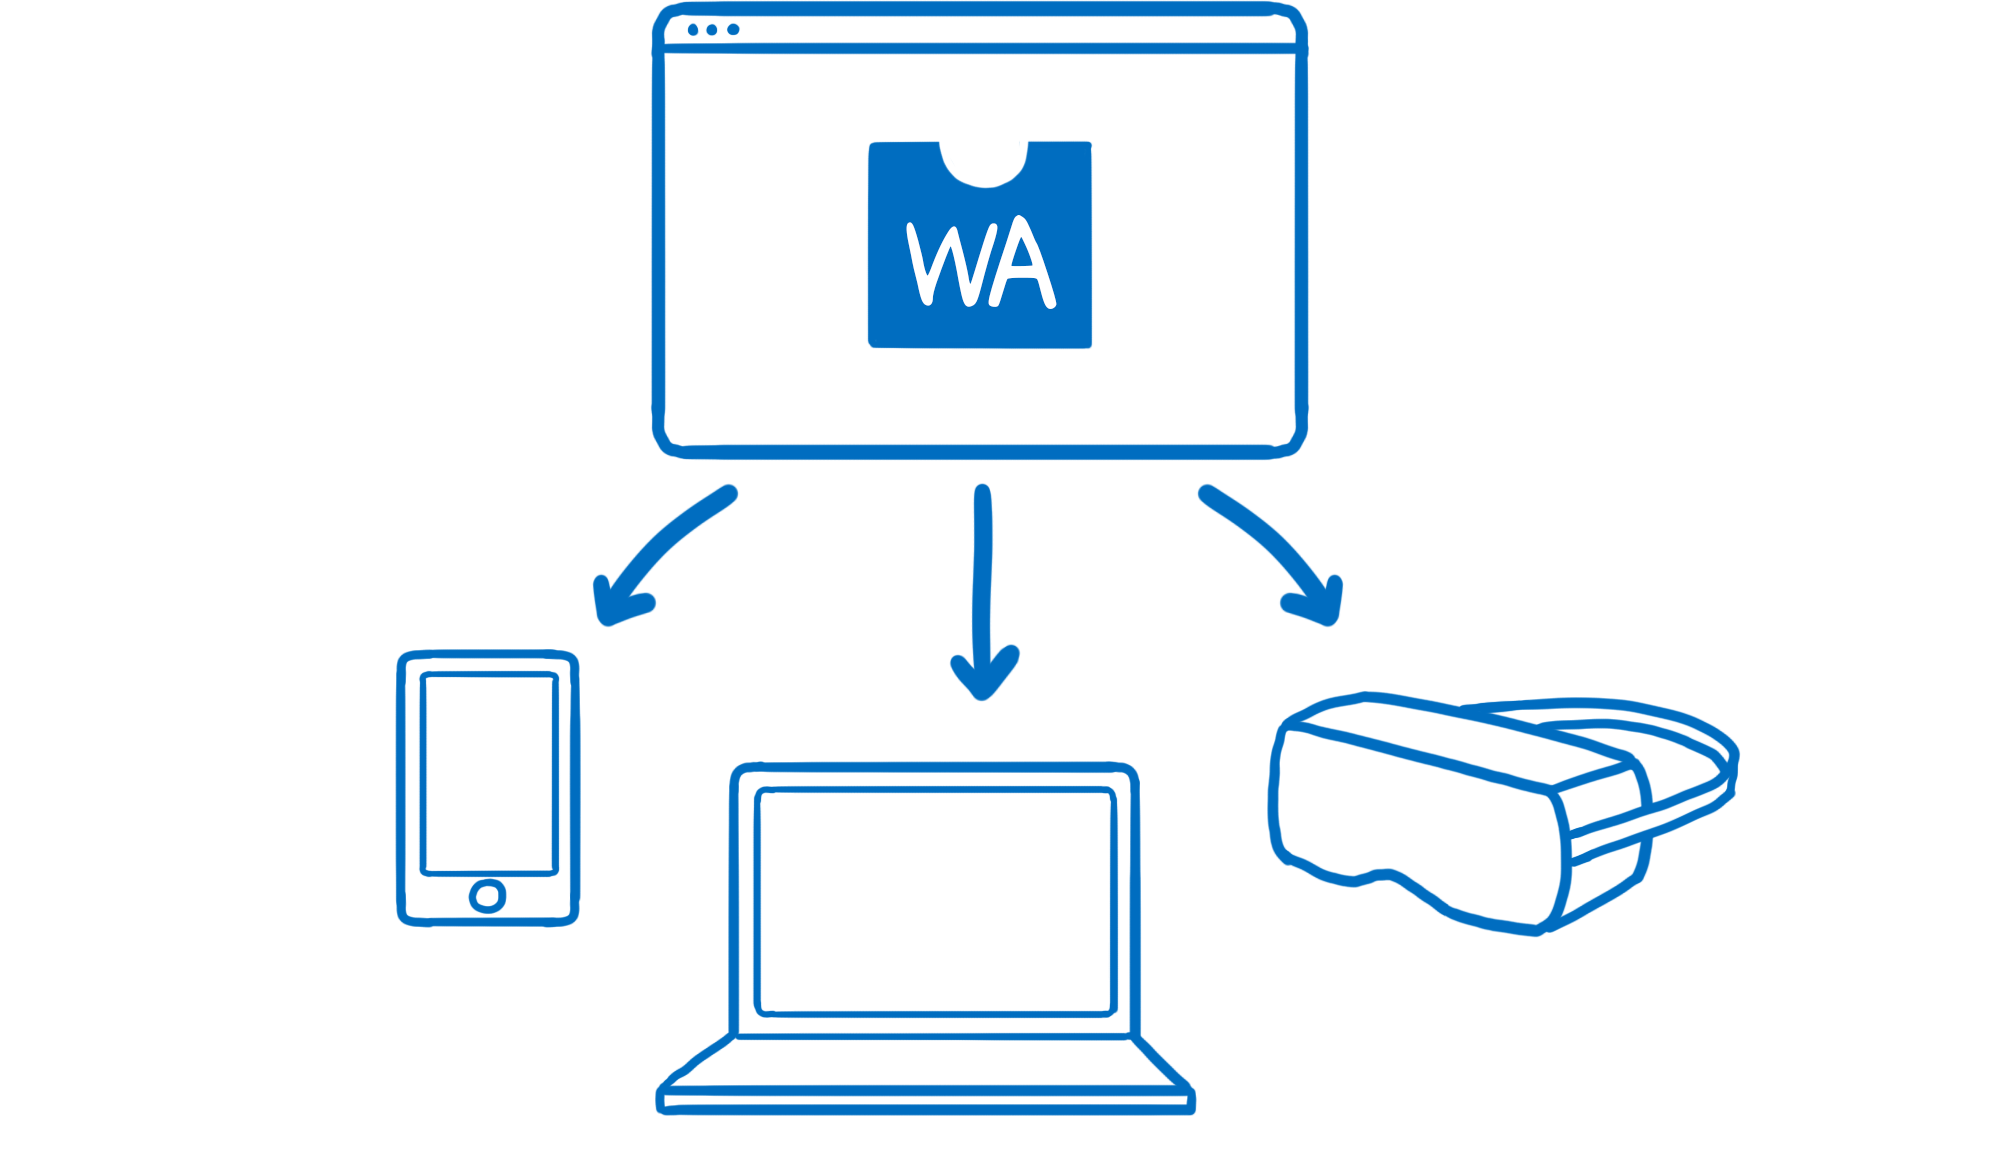 An application window with a WebAssembly logo in it that is going to 3 different devices: a phone, a laptop, and a VR headset